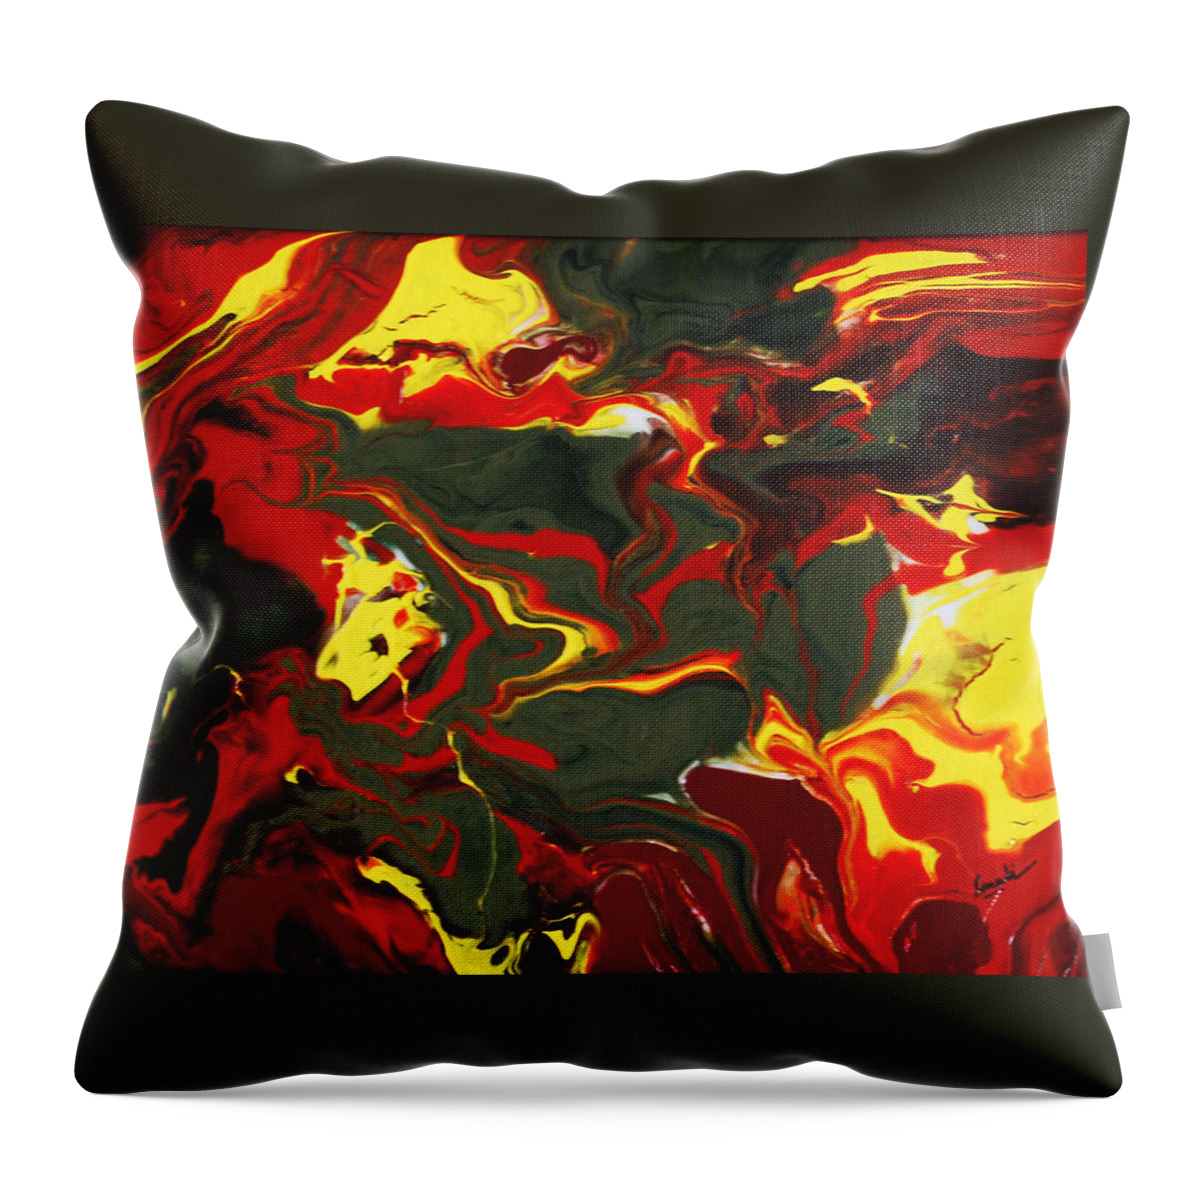 Abstract Throw Pillow featuring the painting The Free Spirit 1 by Sonali Kukreja